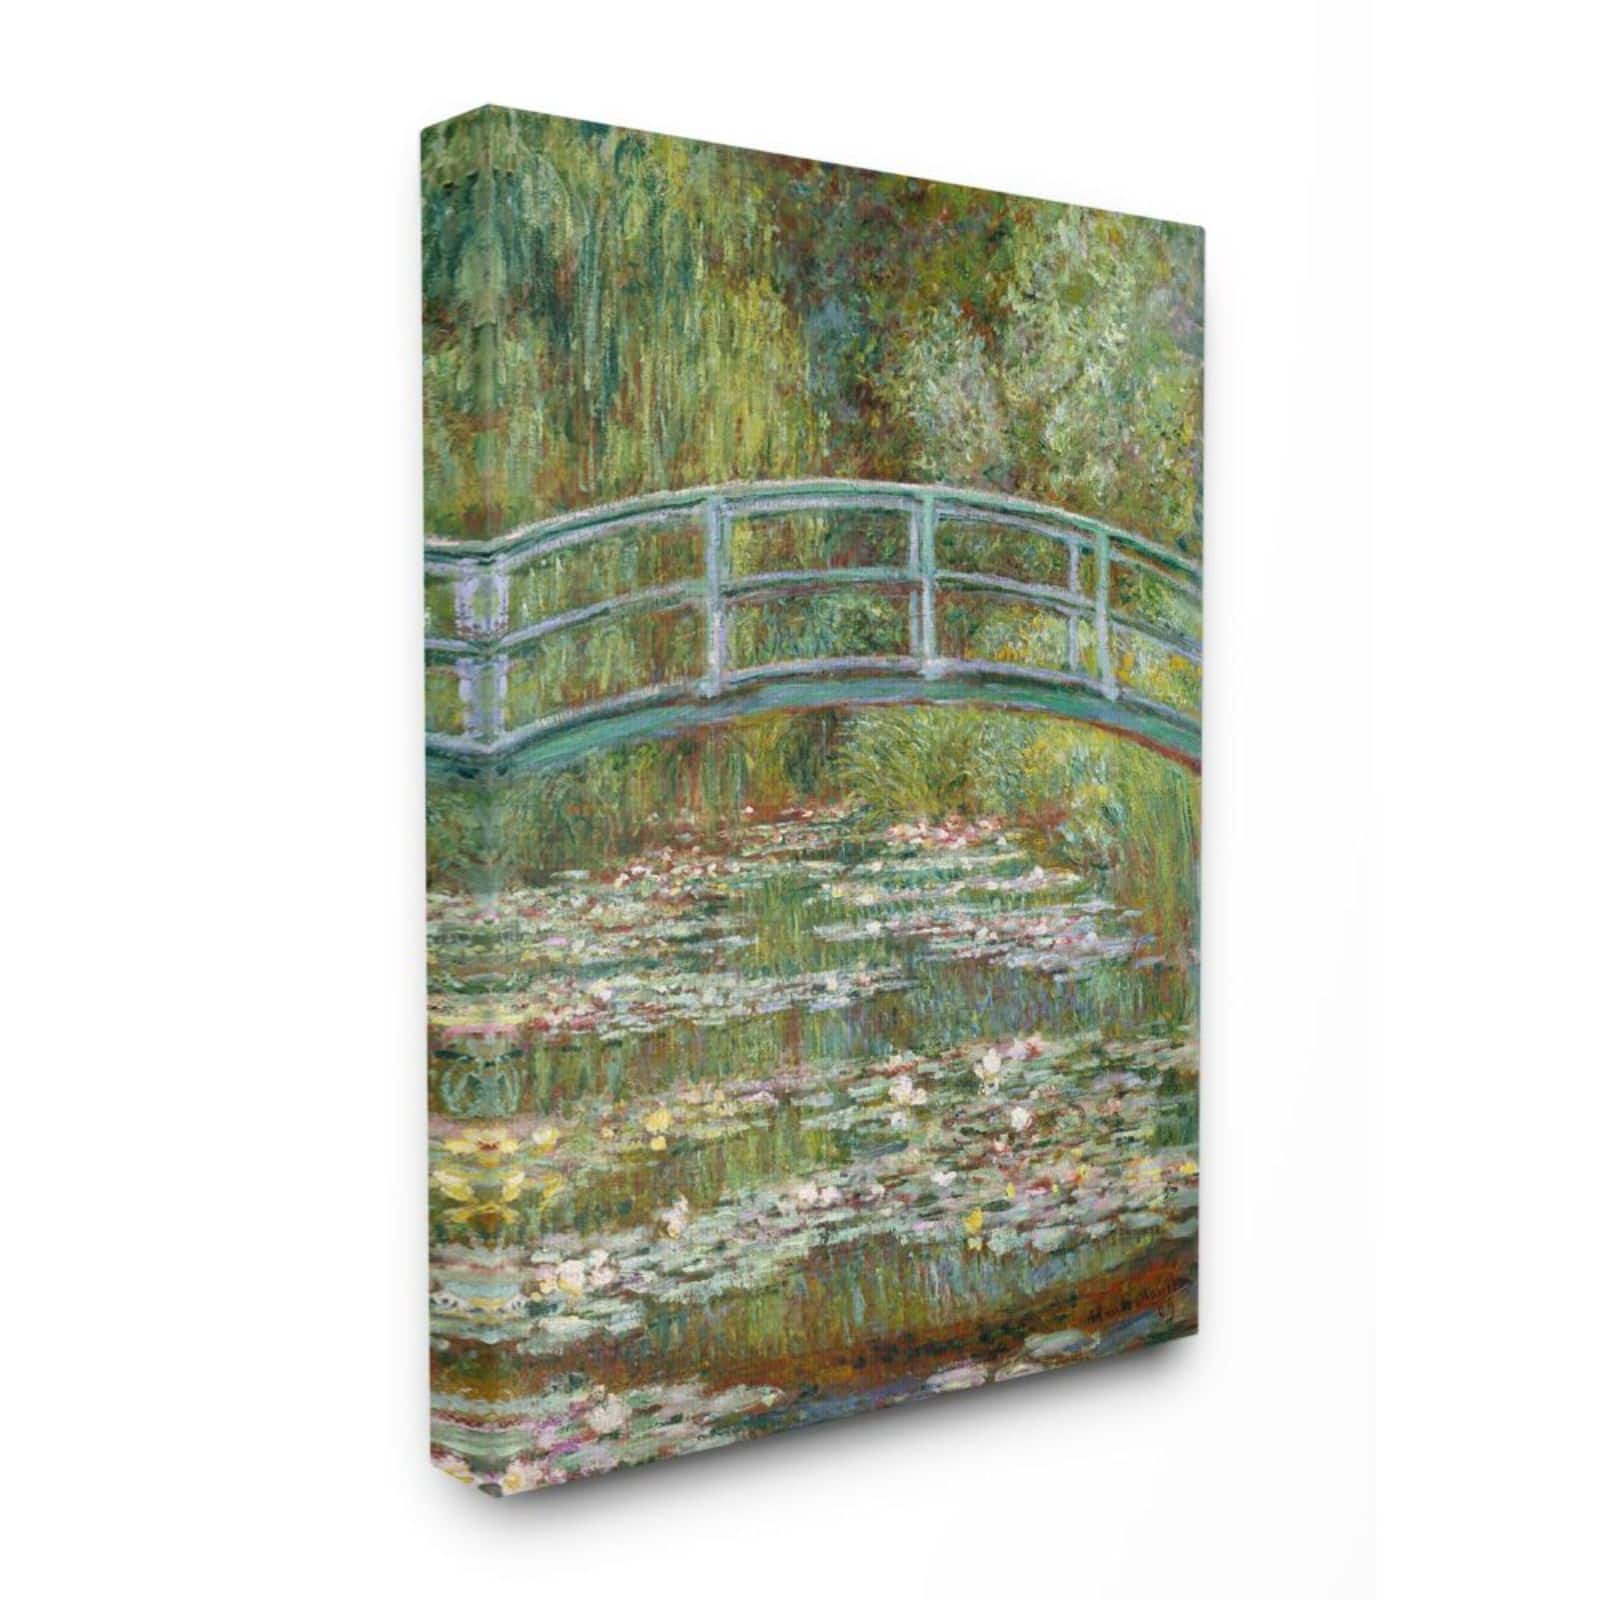 Stupell Industries Bridge Over Lilies Monet Classic Painting